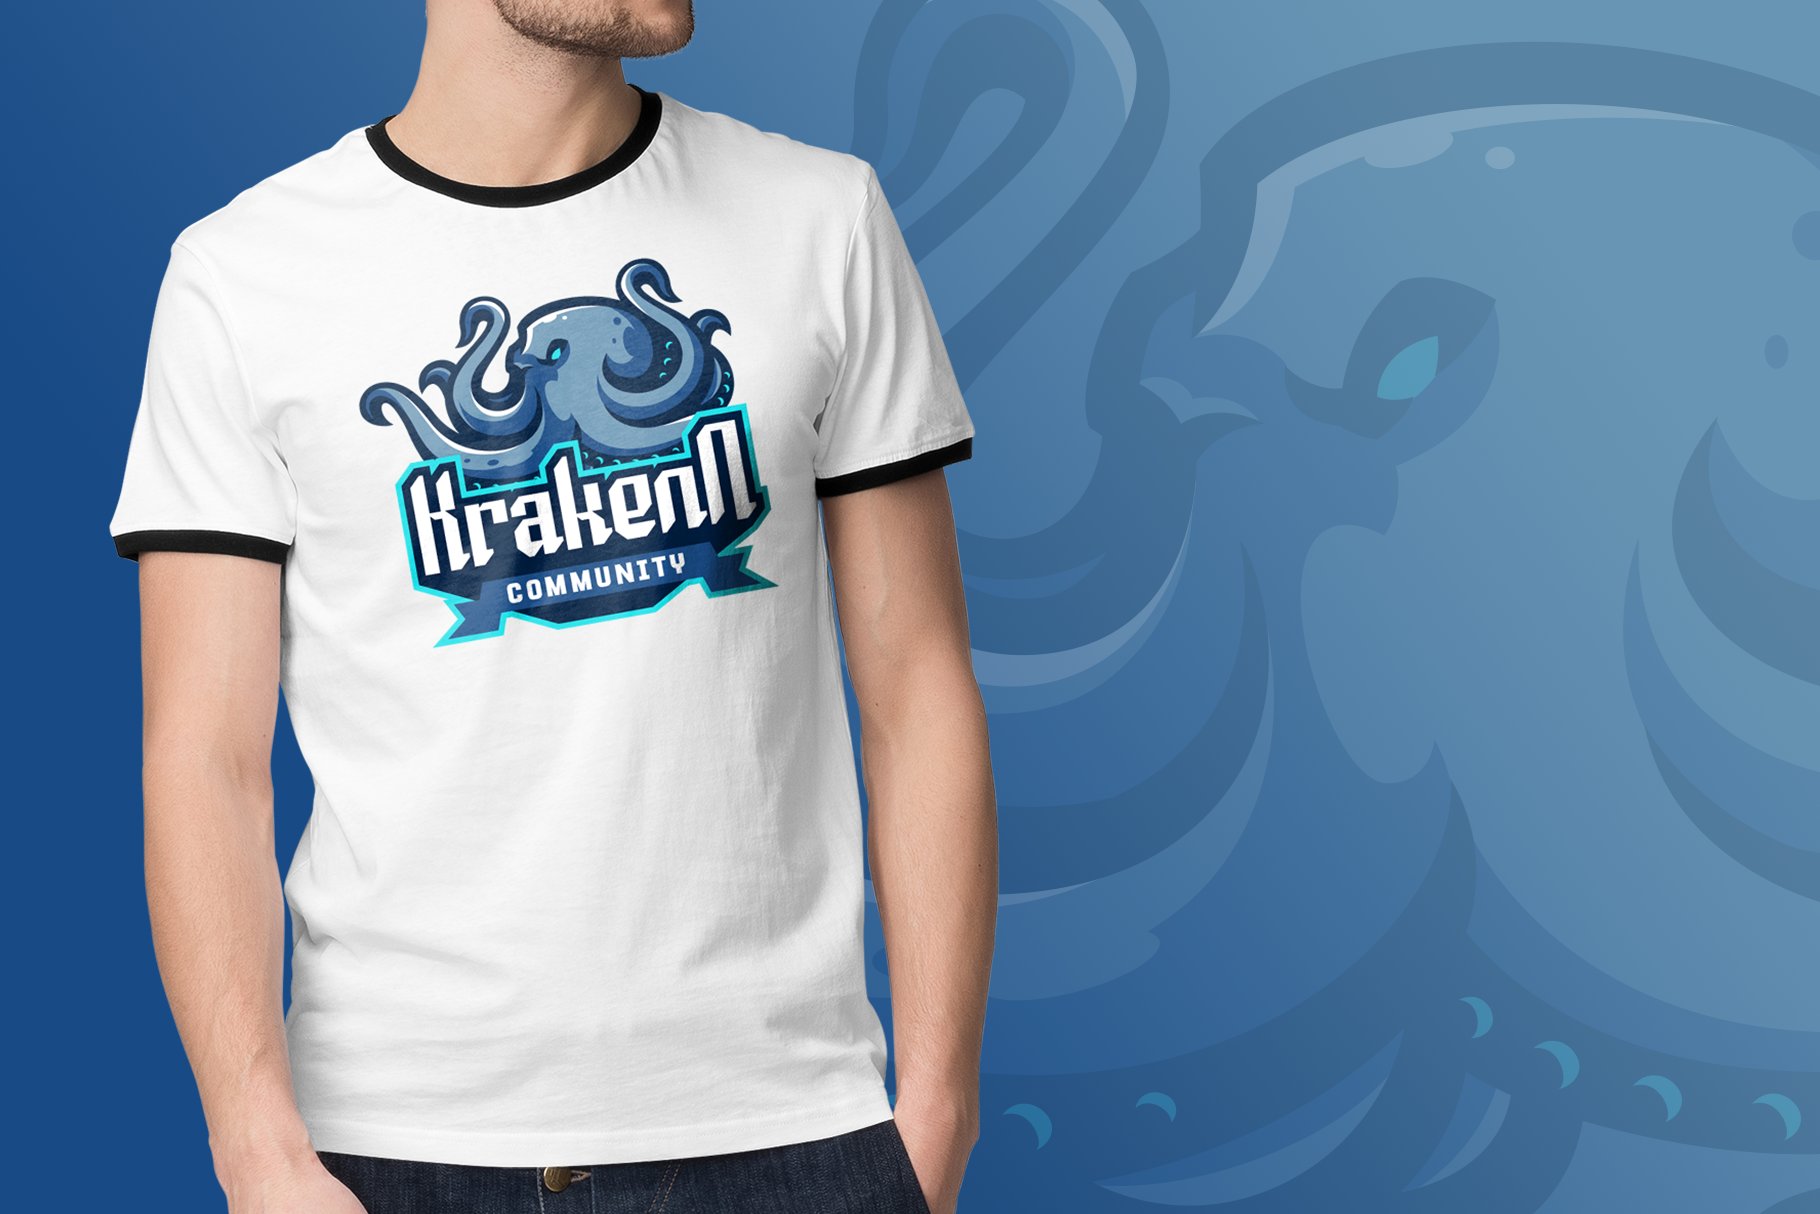 Seattle Kraken Official Shirt designs, themes, templates and